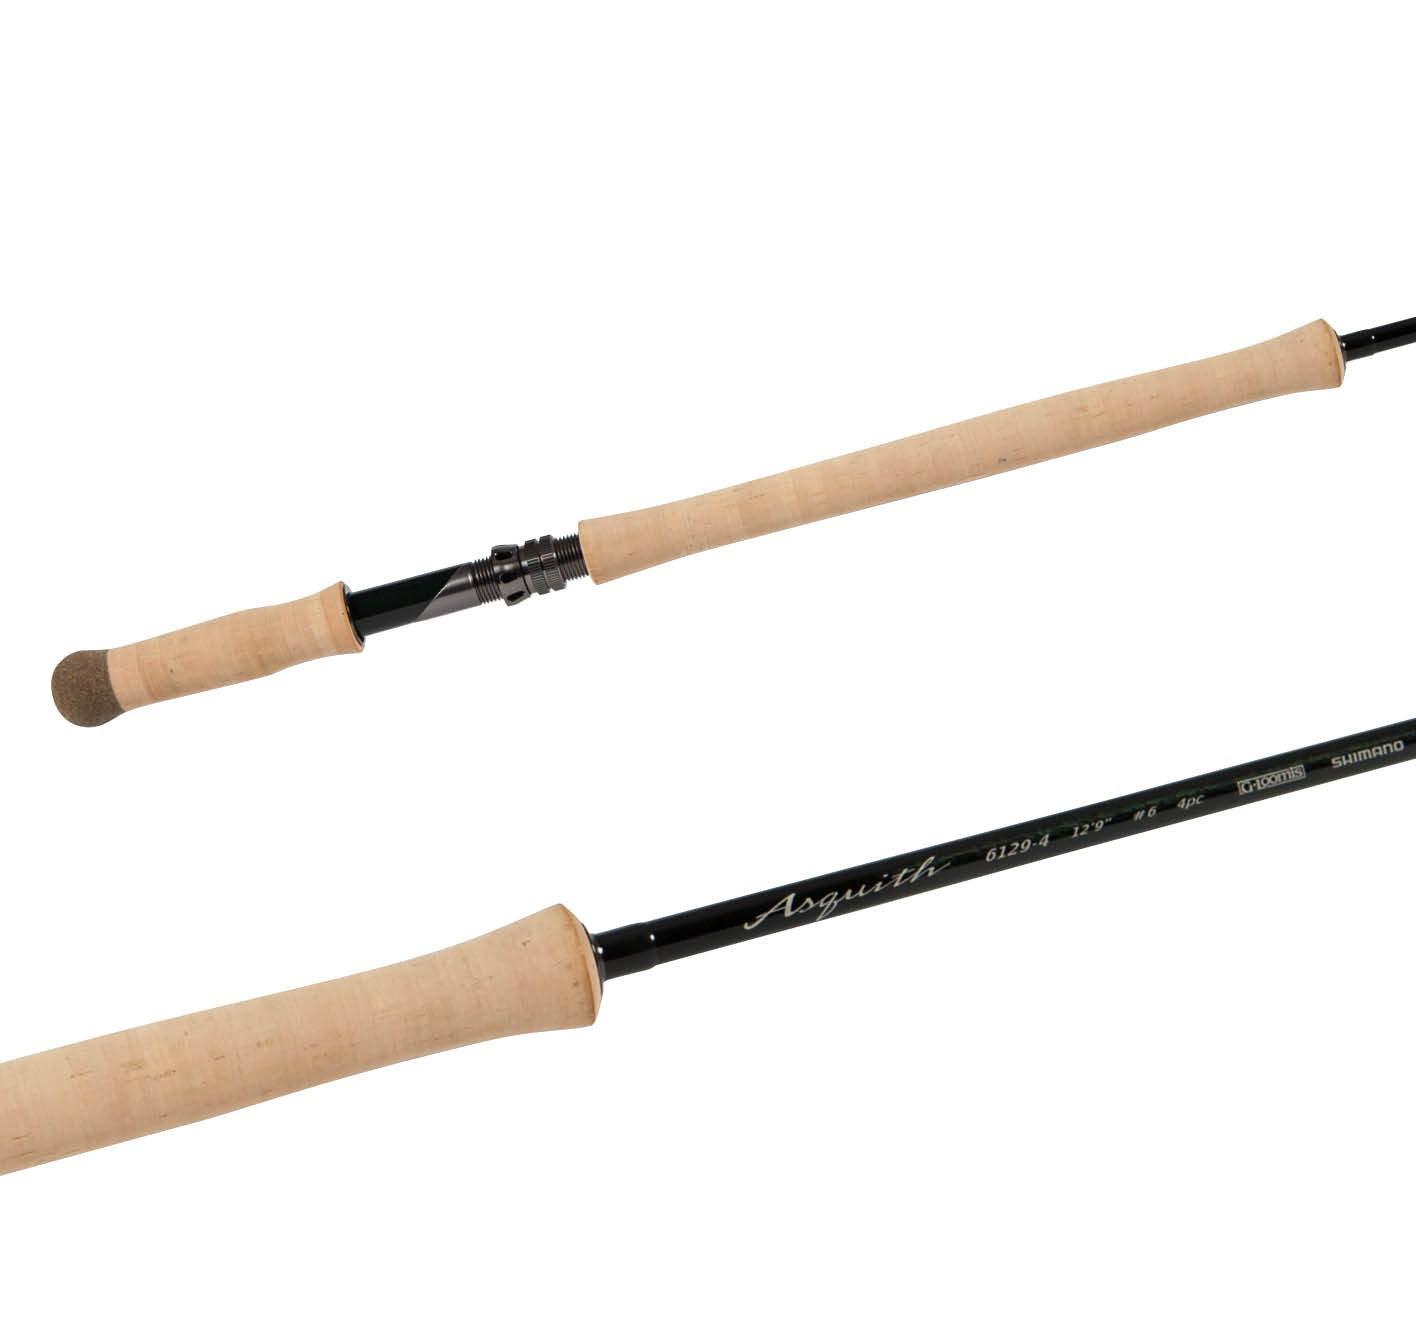 G.Loomis Asquith Spey Fly Rod